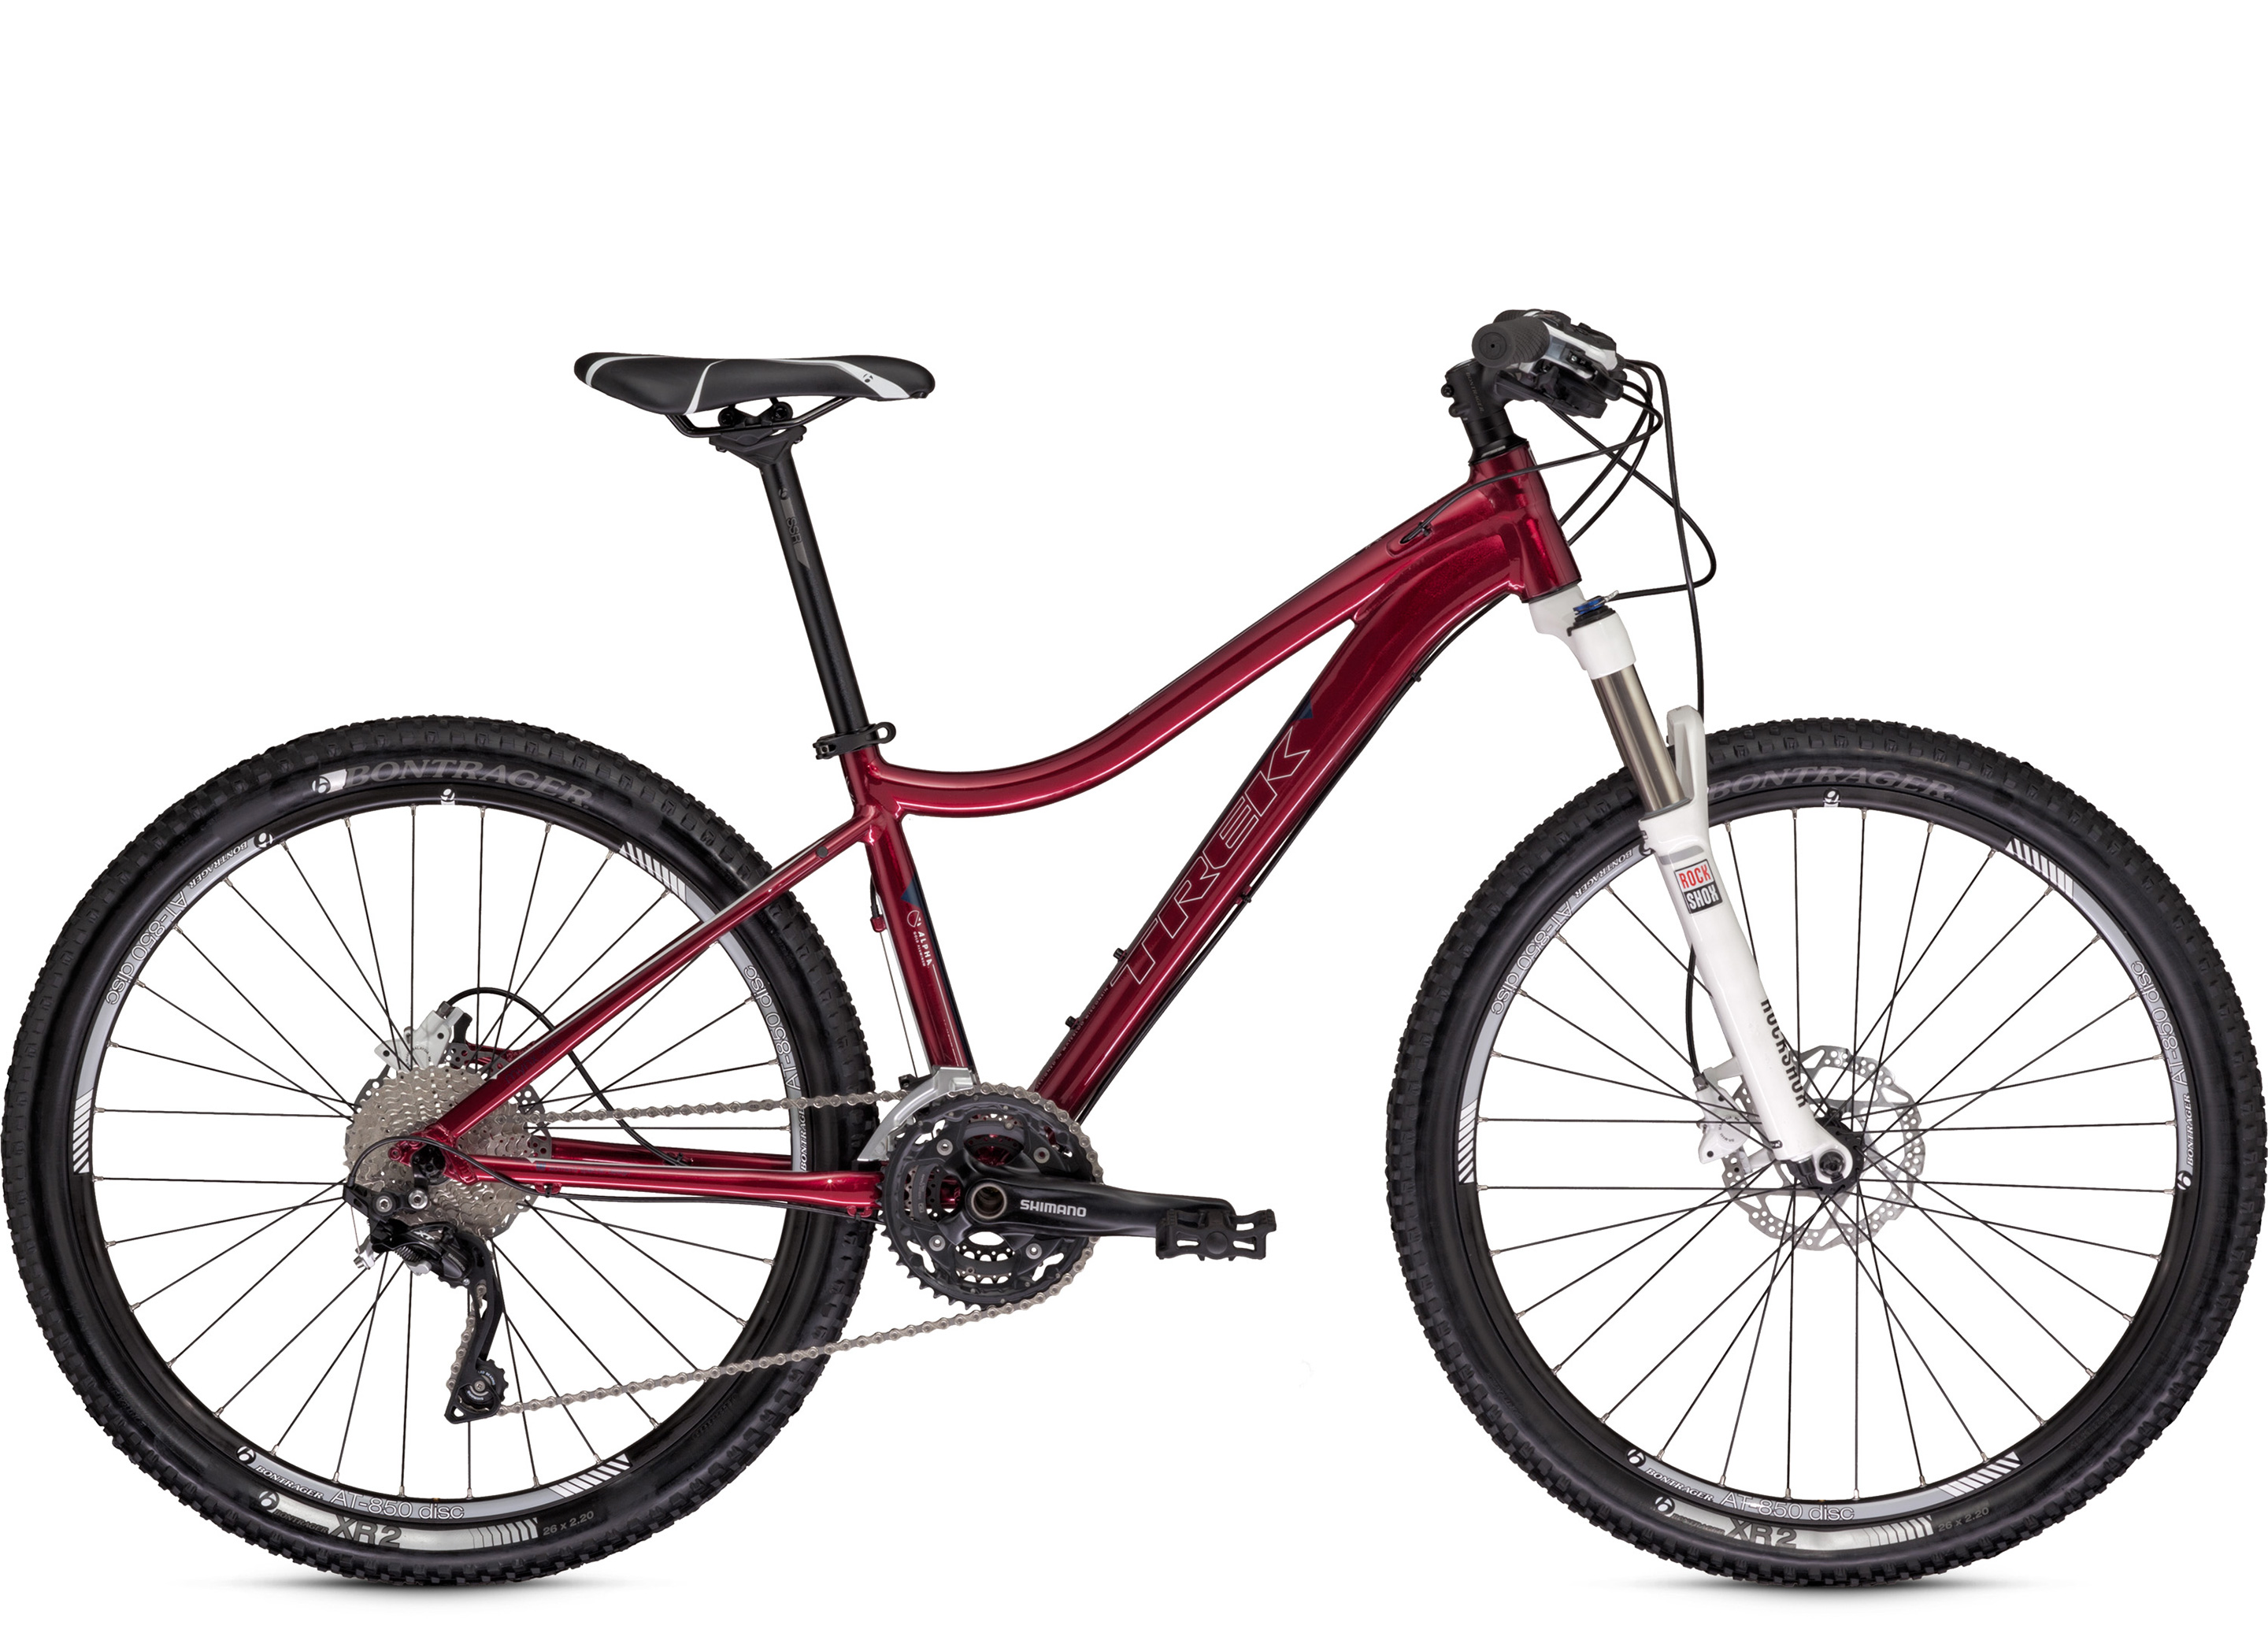 2013 Mynx S | Bouticycle